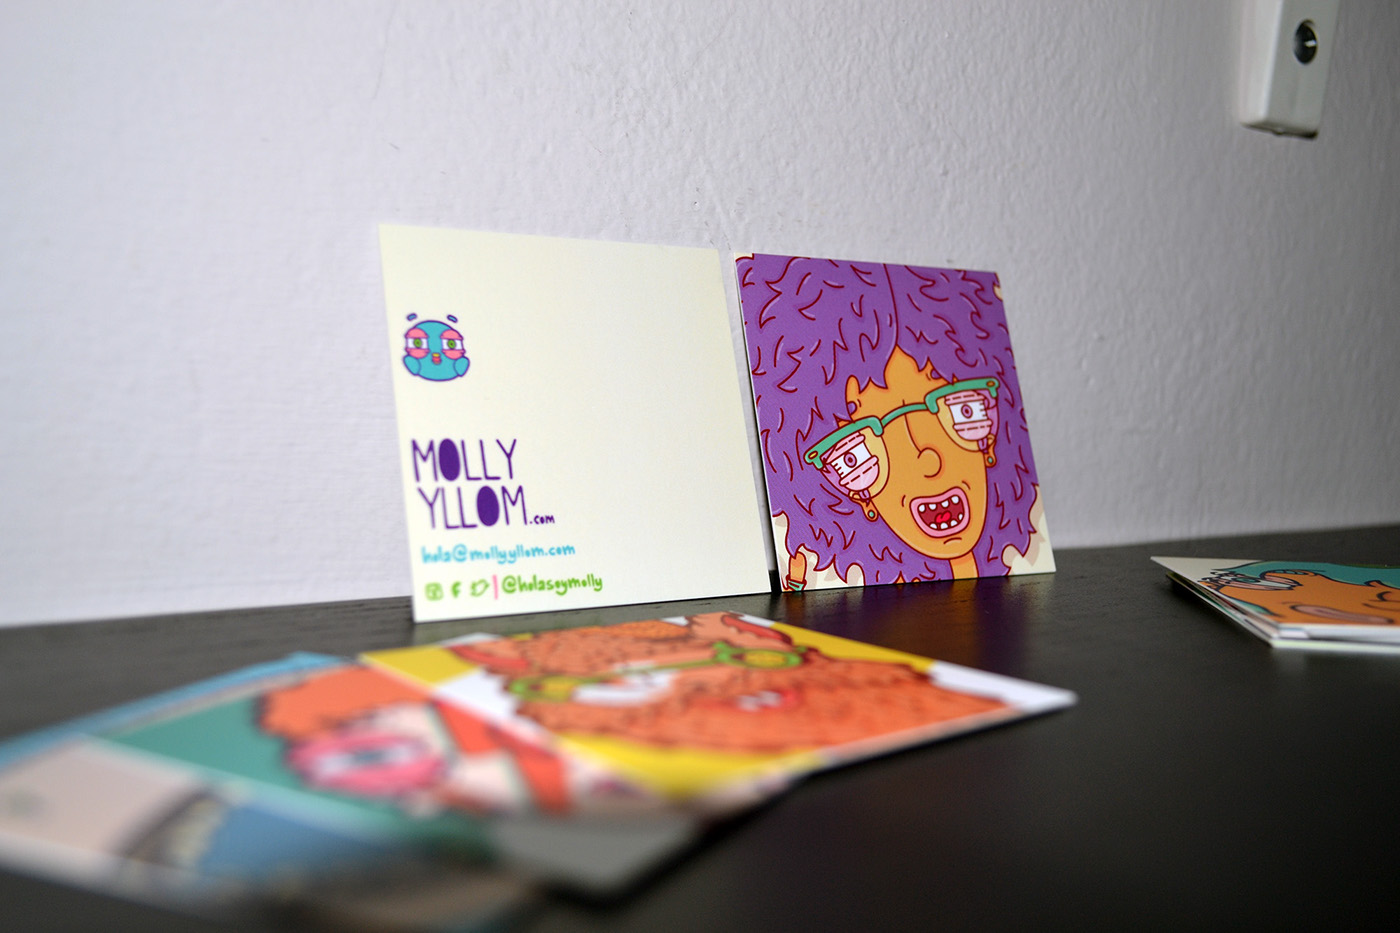 business cards molly Yllom art design square print faces cartoon colorful